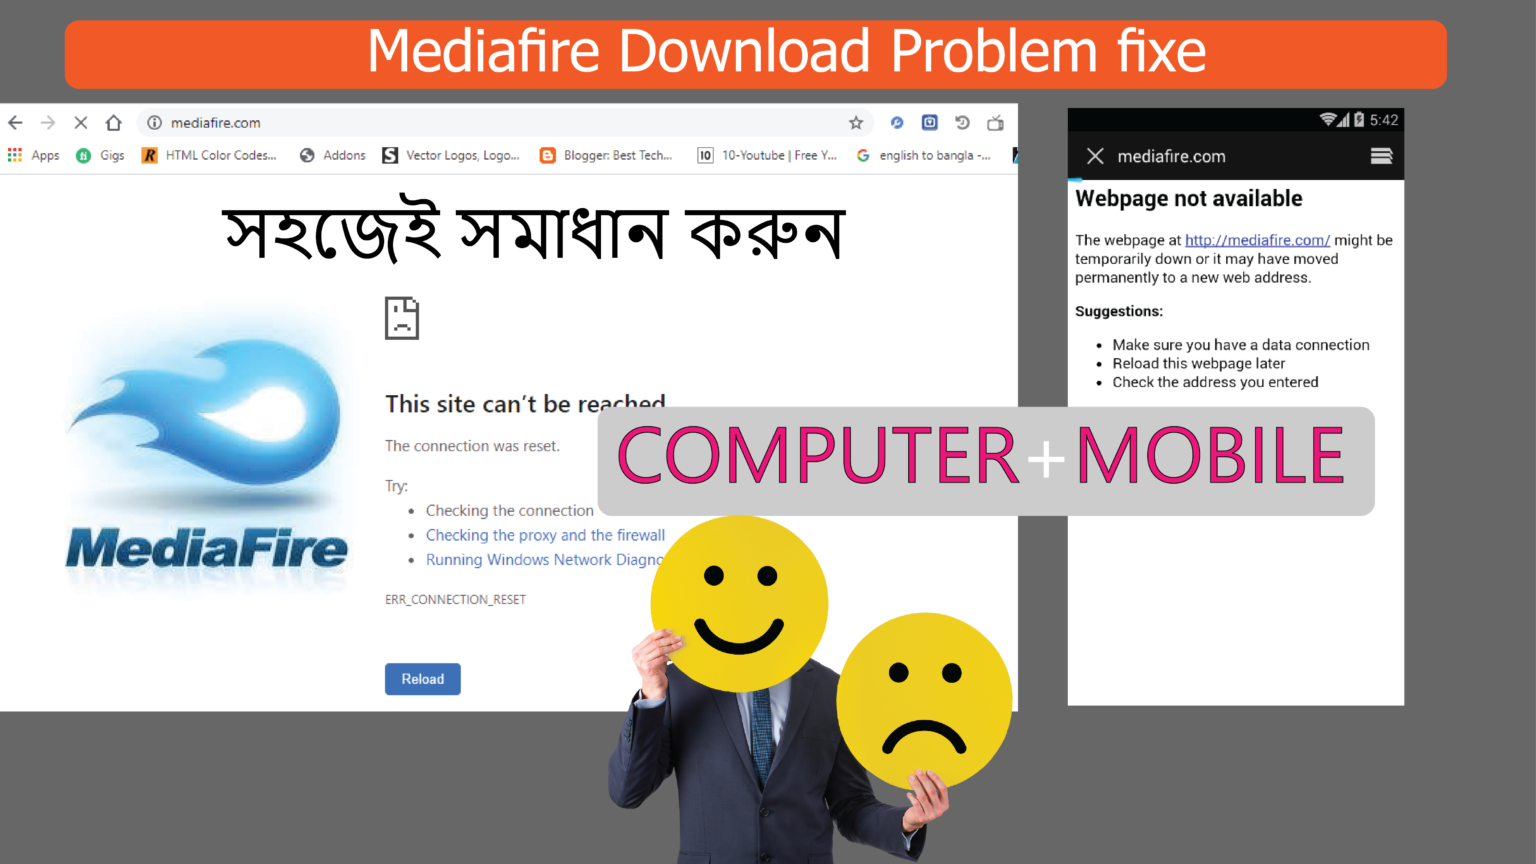 How to fix mediafire download link problem 2020 । mediafire link not working fix ।